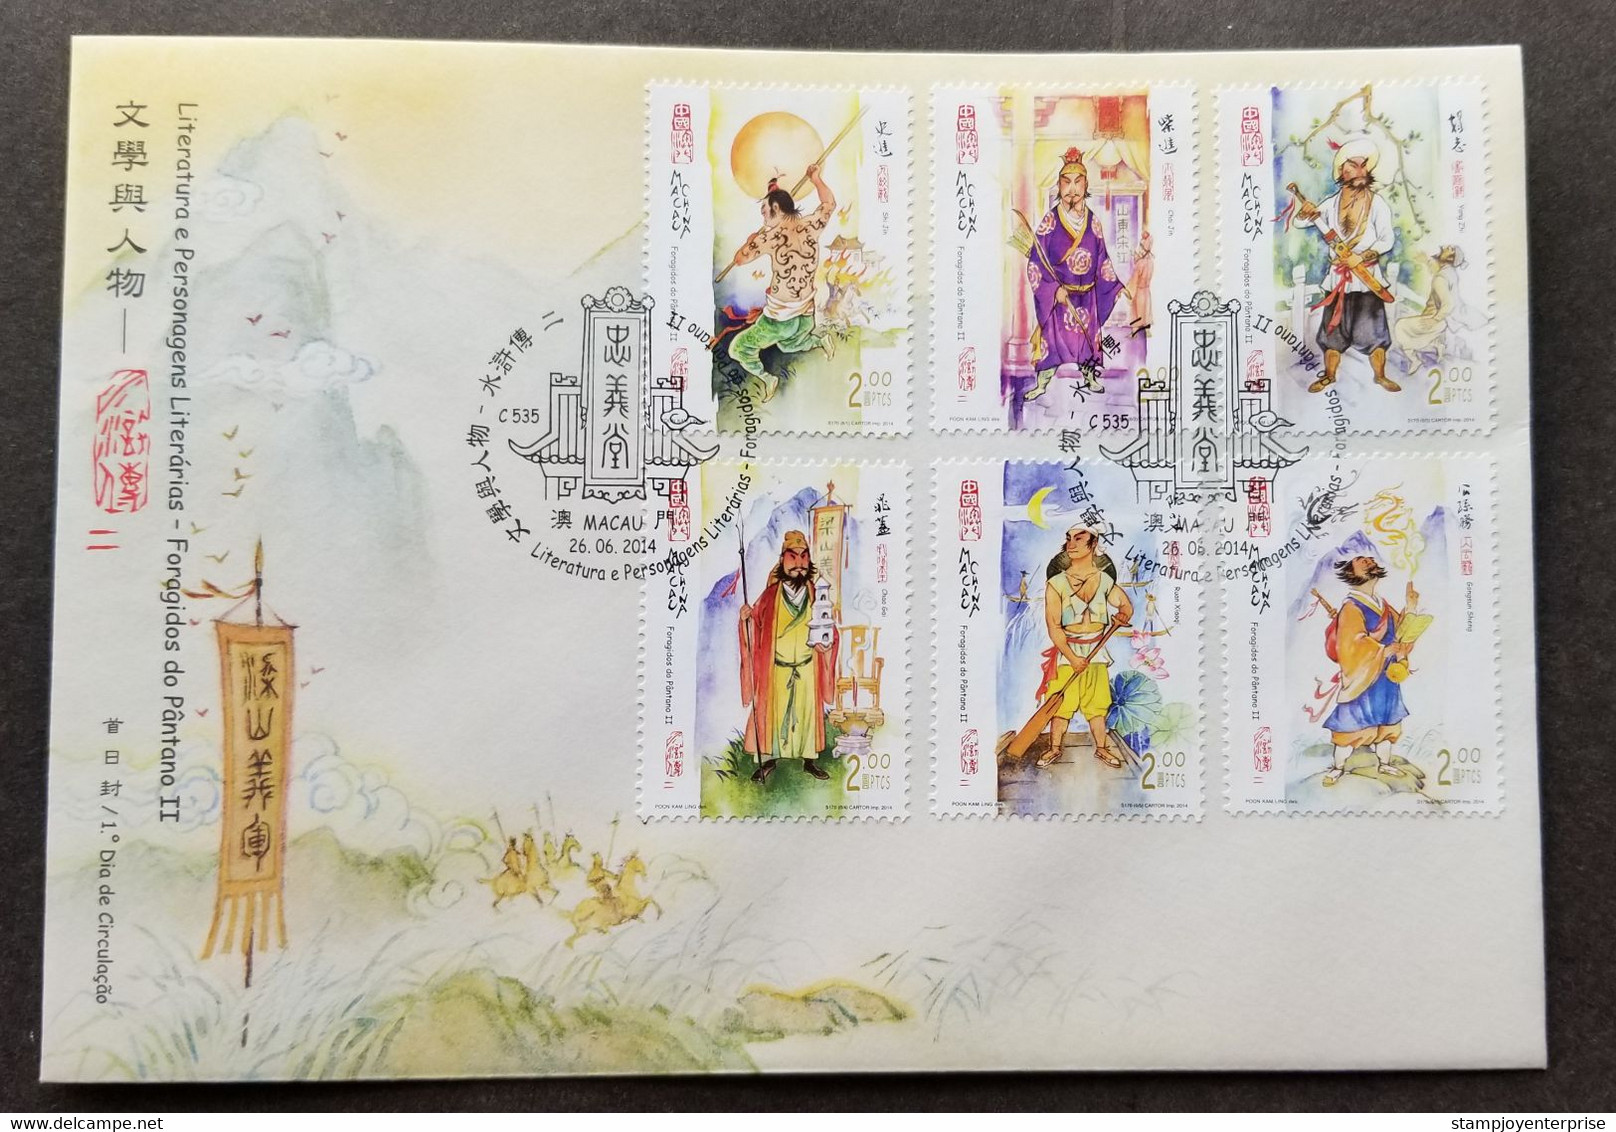 Macau Macao Literature Outlaws Of The Marsh 2014 Dragon Novel (stamp FDC) - Covers & Documents